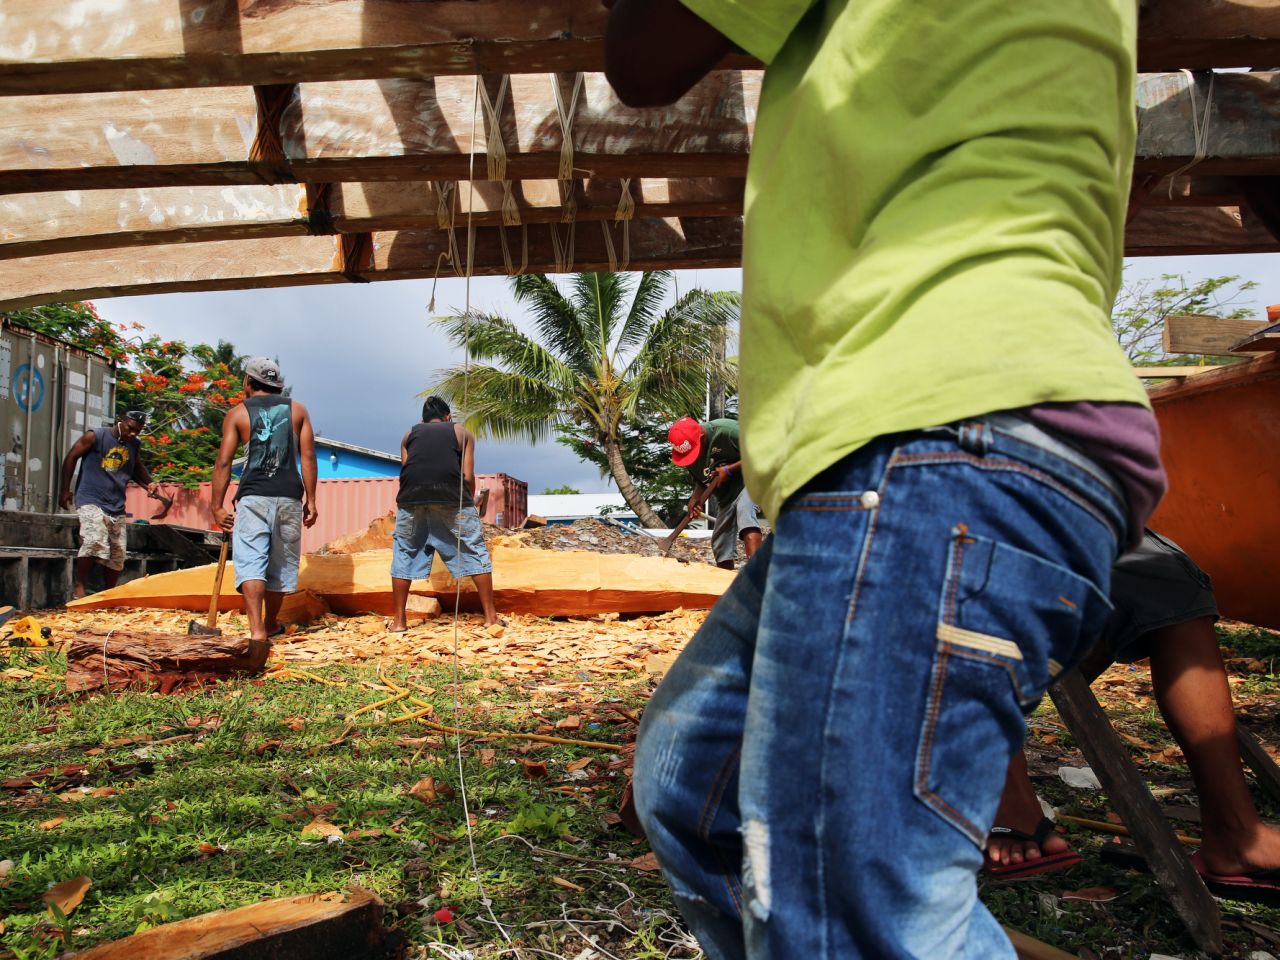 Marshallese people are known as master canoe builders and navigators. Including the ocean, the nation is three times the size of Texas. But it only has as much land as Washington, D.C. "We are not a small island country," said Tony de Brum, the foreign minister. "We are a big ocean country."